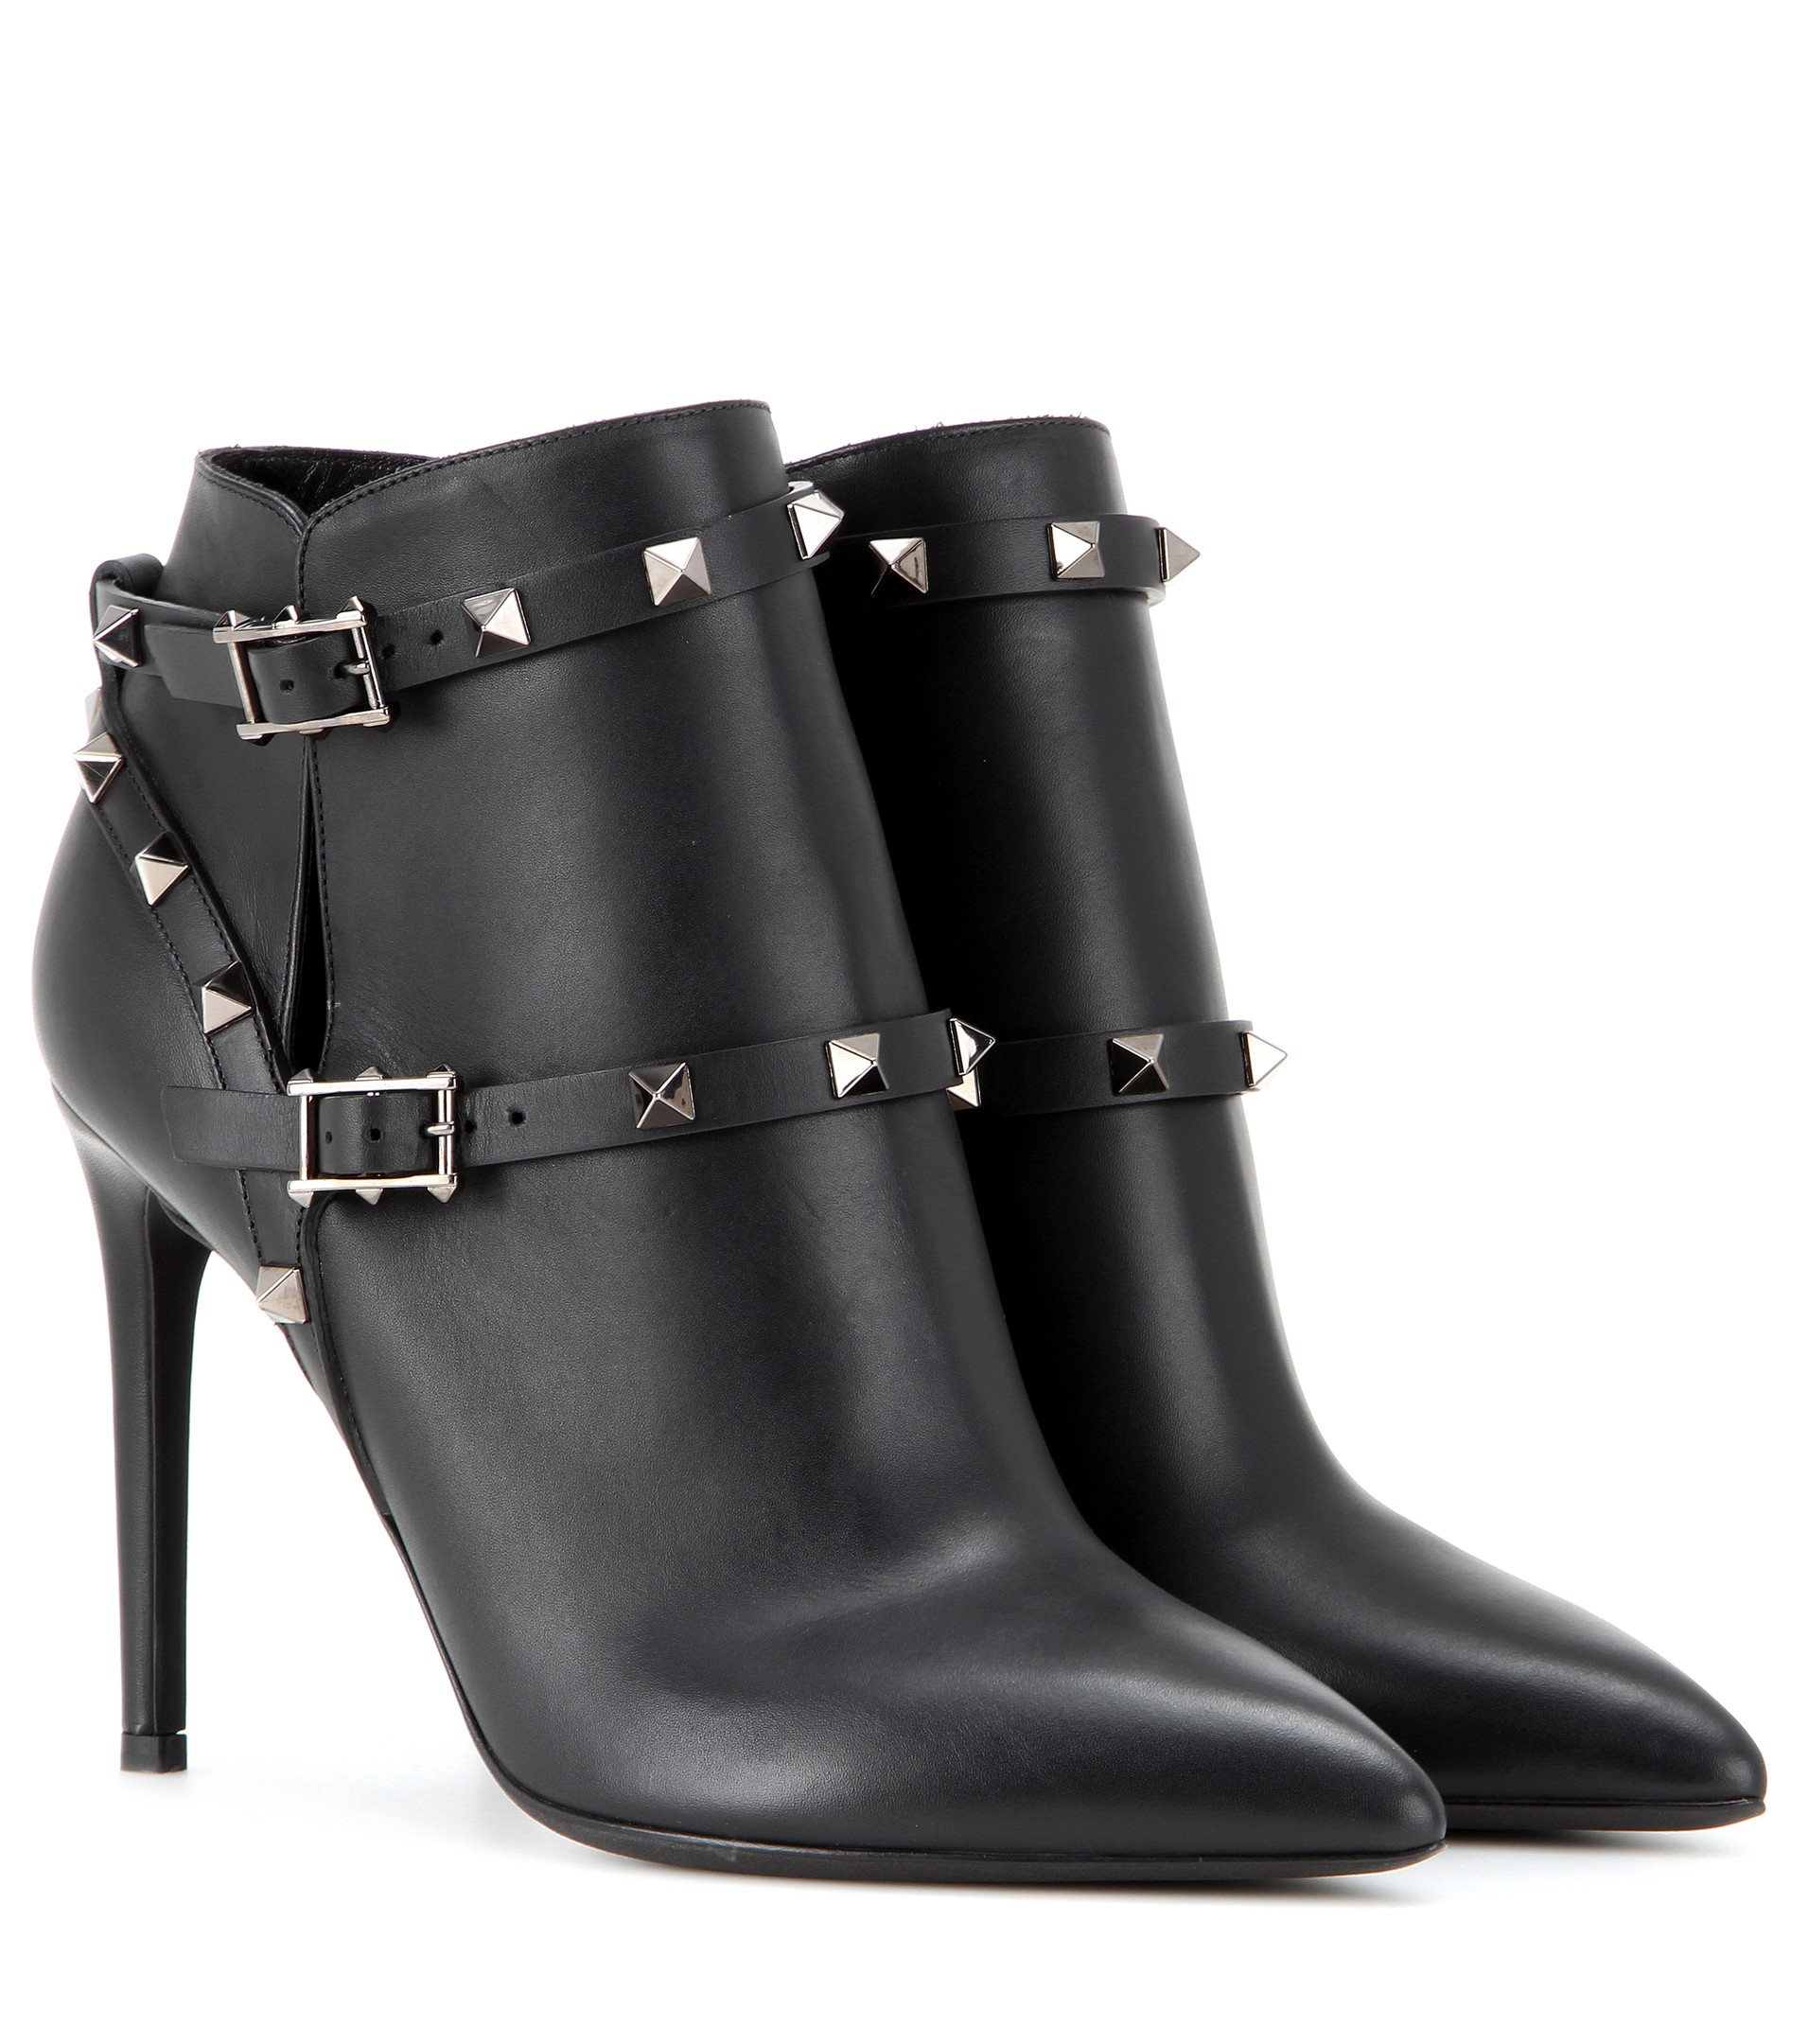 buy > valentino ankle boot > Up to 77% OFF > Free shipping